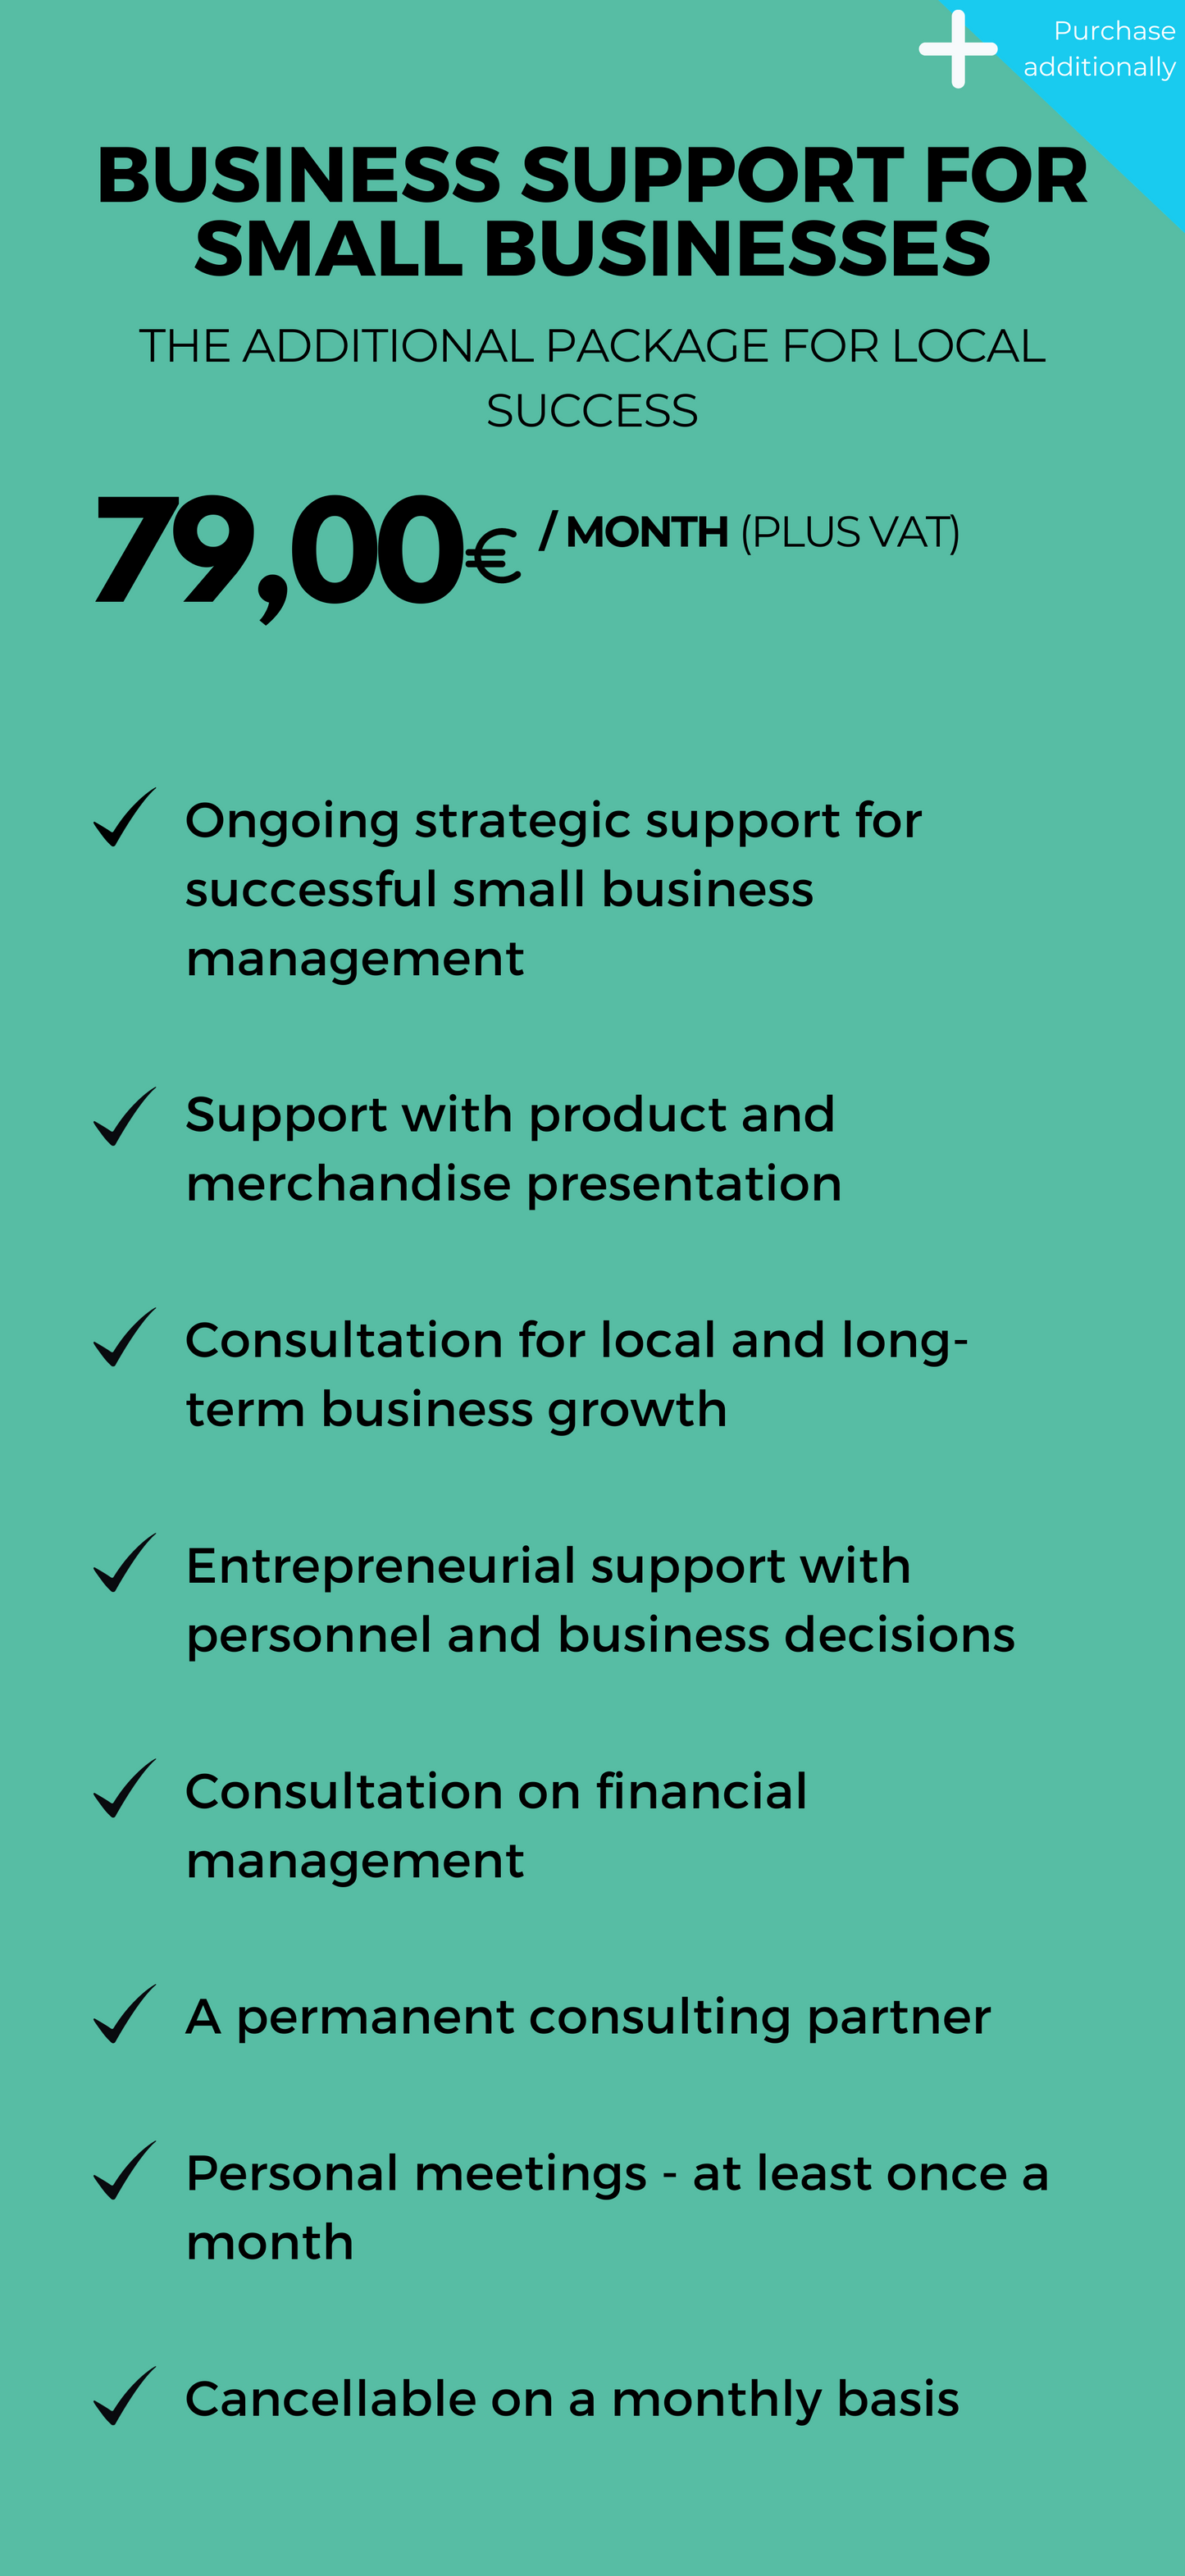 ADDITIONAL PACKAGE Business support for small businesses